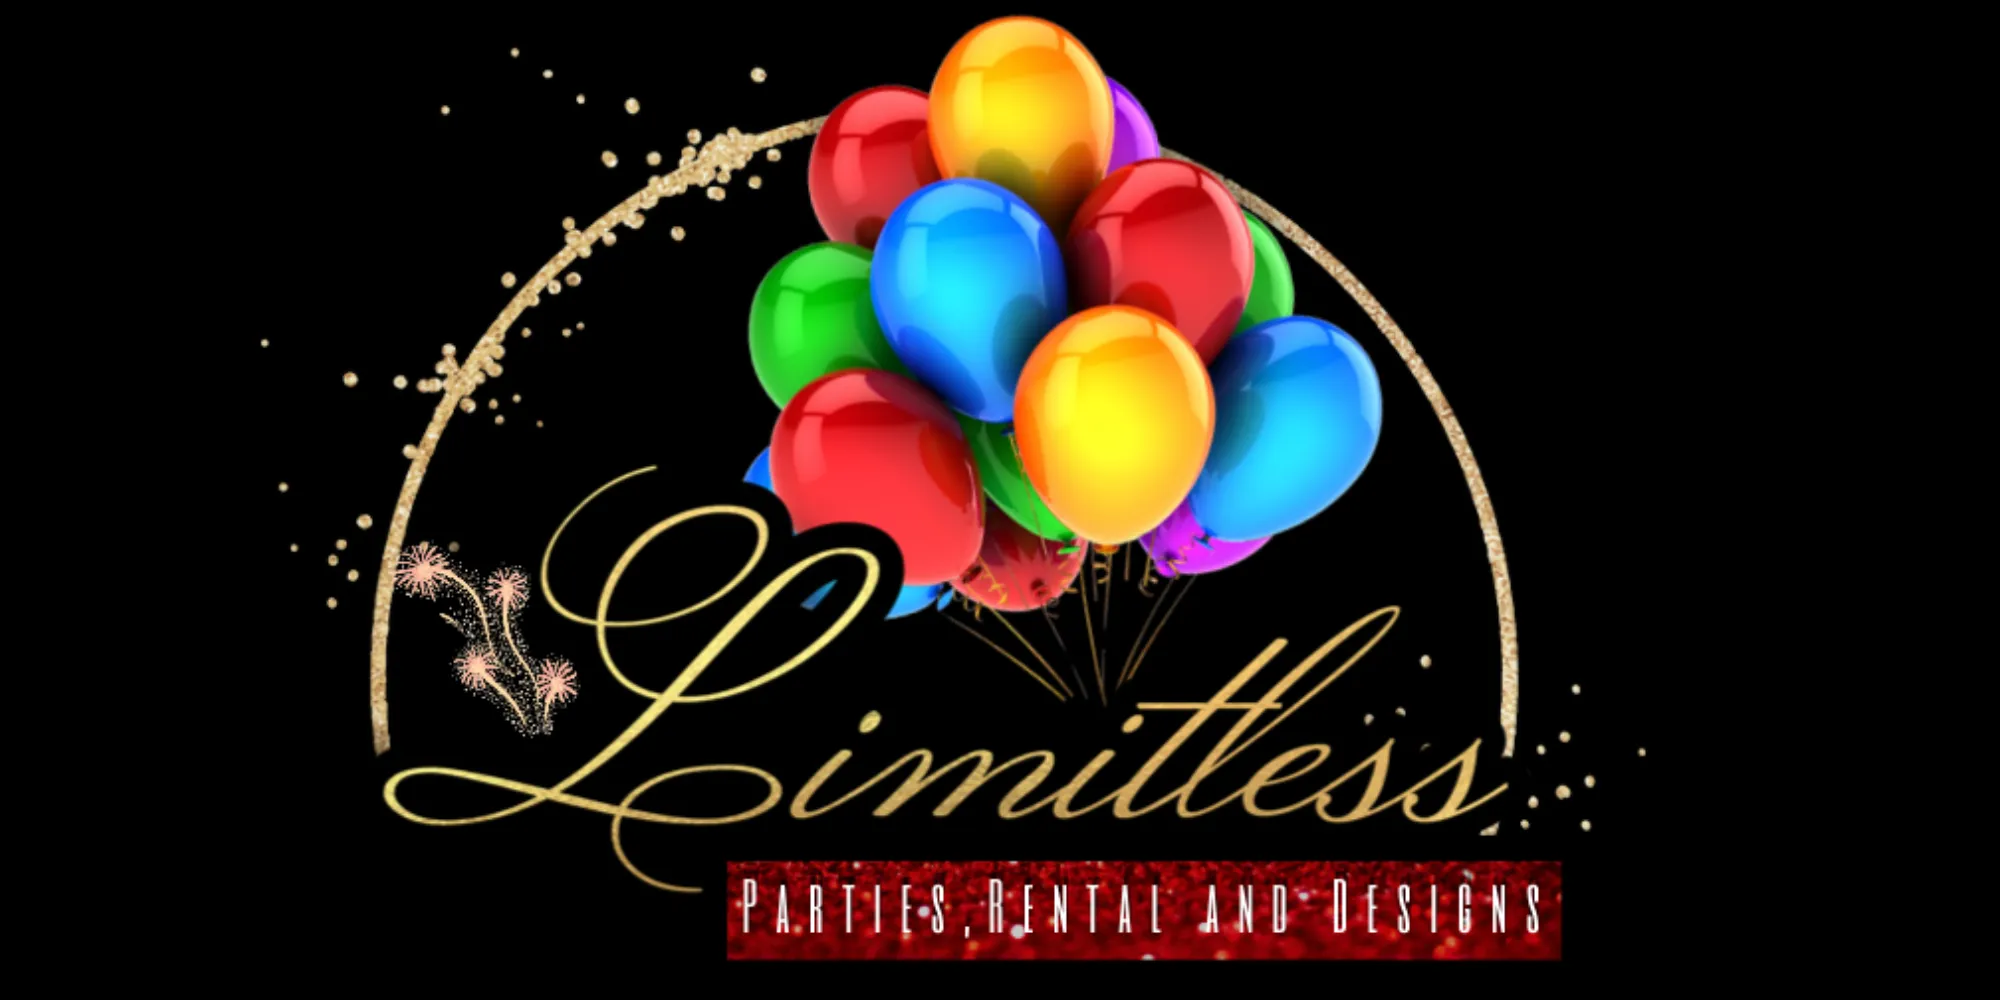 Limitless Party, Rentals and Designs